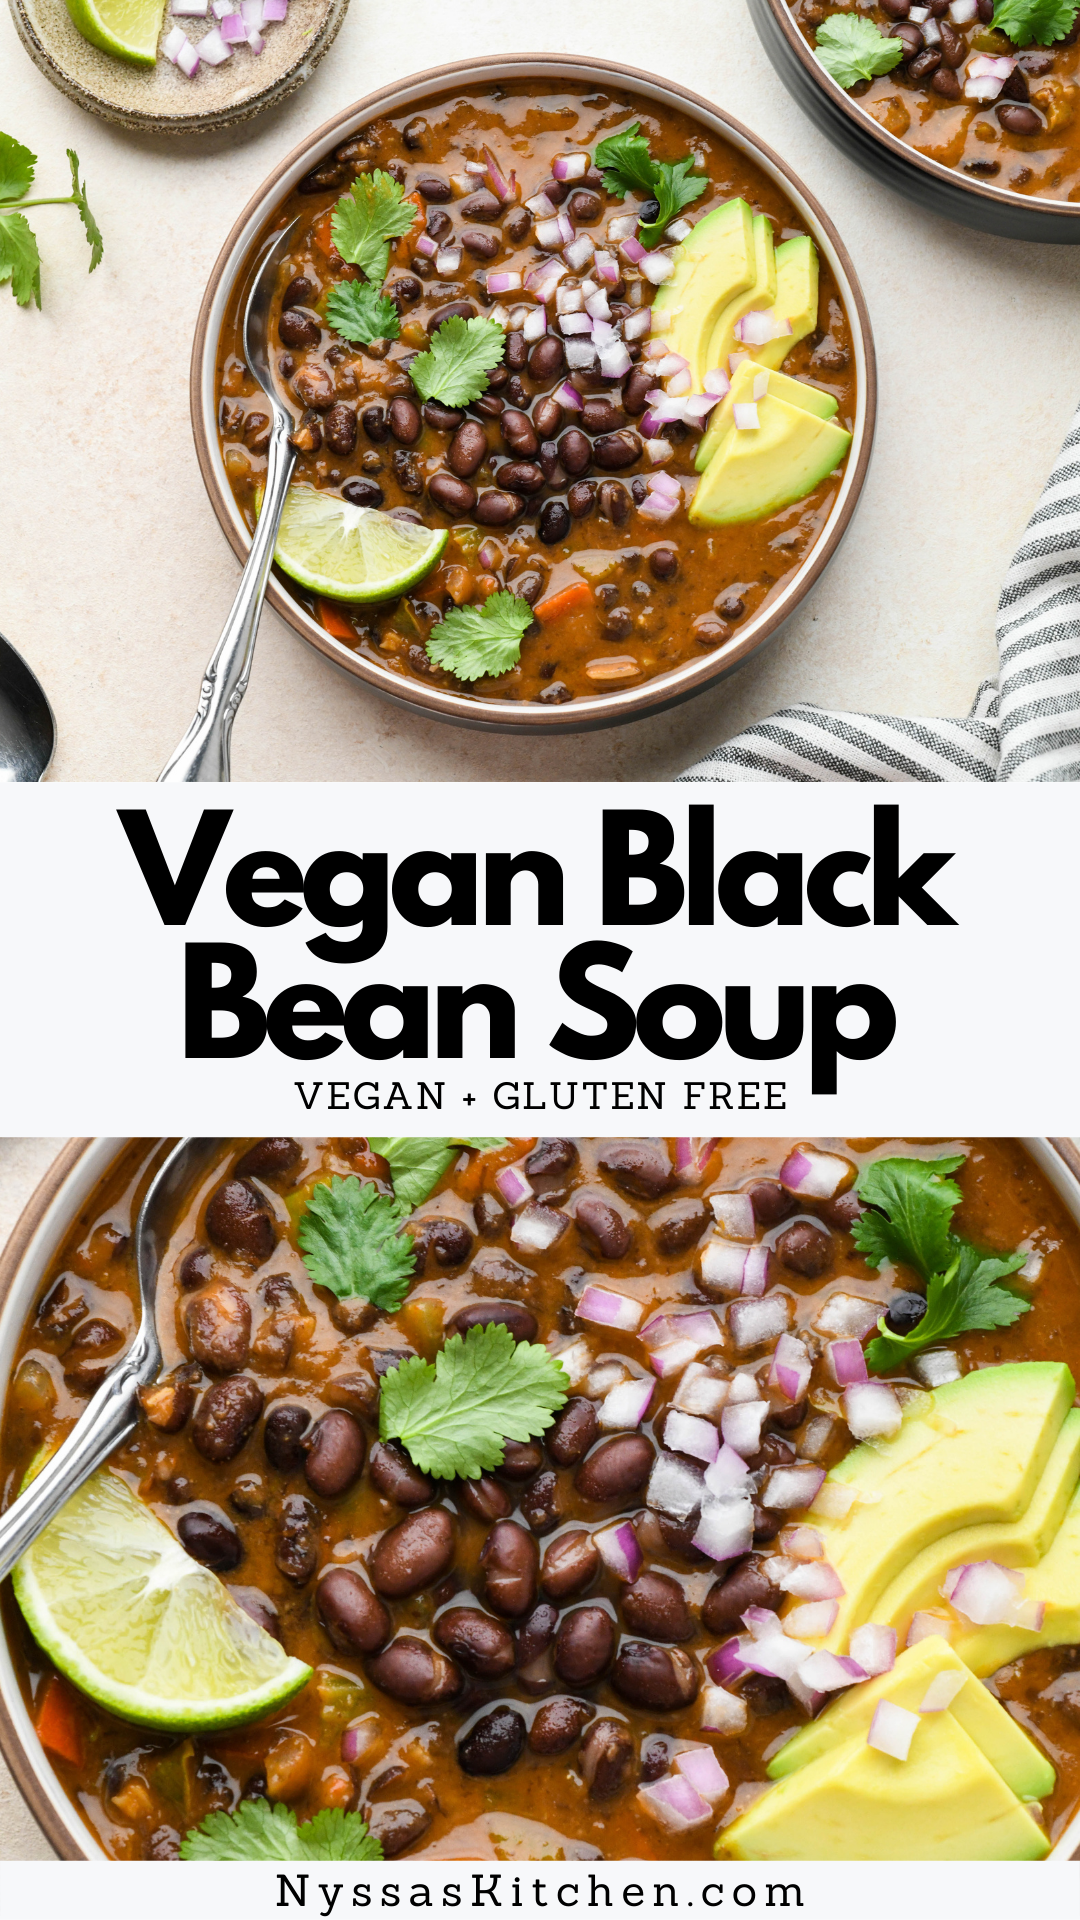 This vegan black bean soup is made with healthy, simple ingredients like canned black beans, veggies, and flavorful spices. Hearty and full of flavor! Top it with your favorite garnishes for a quick and easy dinner that the whole family will love. A Mexican inspired soup that freezes well and is great for weekend meal prep. Vegan, vegetarian, gluten free, and dairy free.